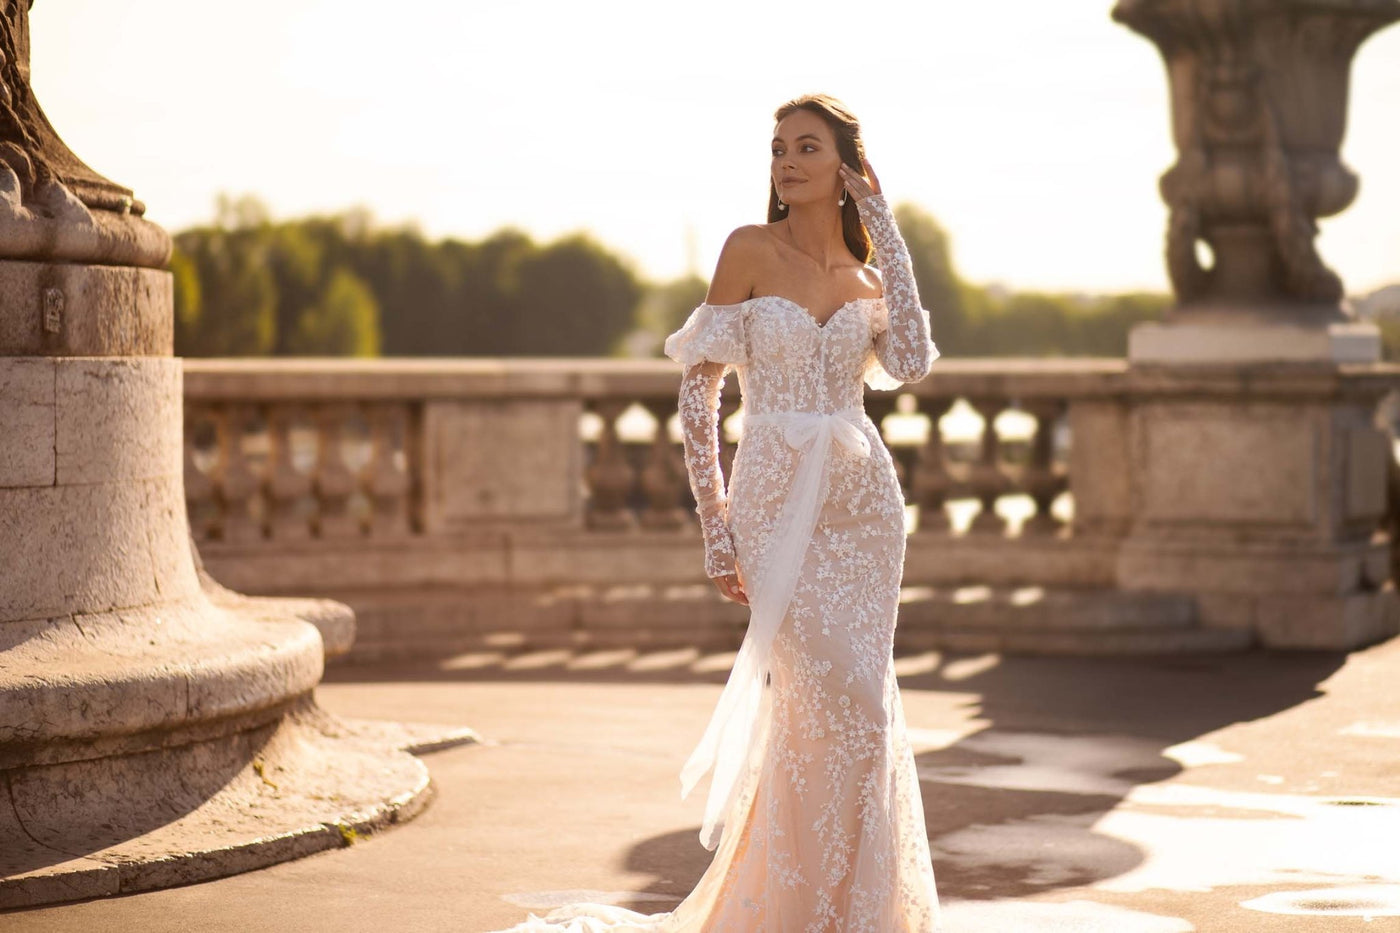 Champagne Wedding Dress with Sleeves and Lace Appliqués, Featuring 3D Floral Design, Long Chapel Train, and Delicate Tulle Plus Size - WonderlandByLilian